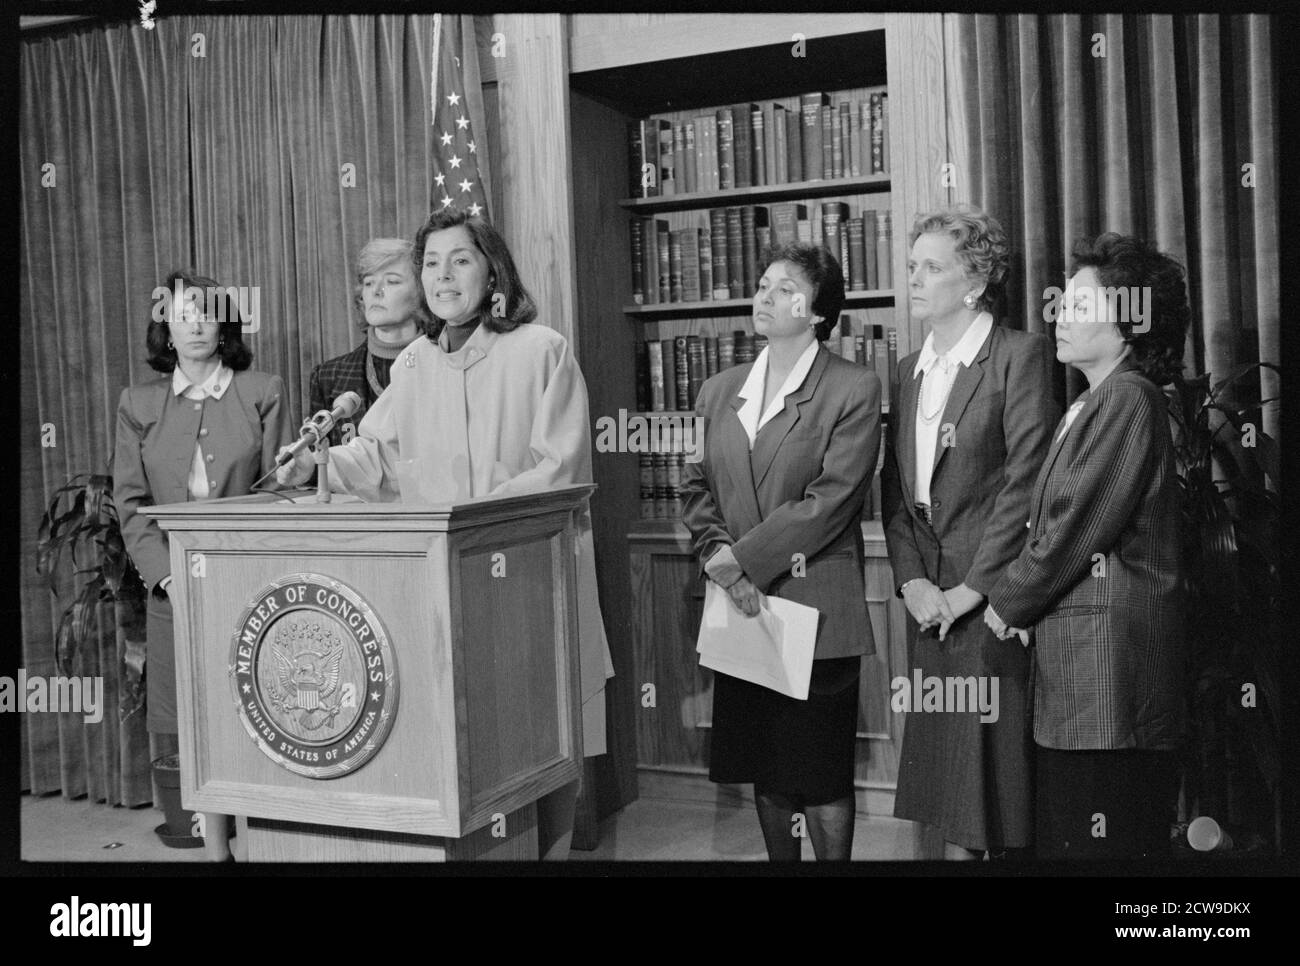 Representatives (l-r) Nancy Pelosi, Patricia Schroeder, Barbara Boxer (at podium), Nita Lowey, Marilyn Lloyd and Patsy Mink at press conference condemning President George H.W. Bush's veto of civil rights legislation, Washington, DC, 10/22/1990.  (Photo by Michael R Jenkins/CQ Roll Call Photograph Collection/RBM Vintage Images) Stock Photo